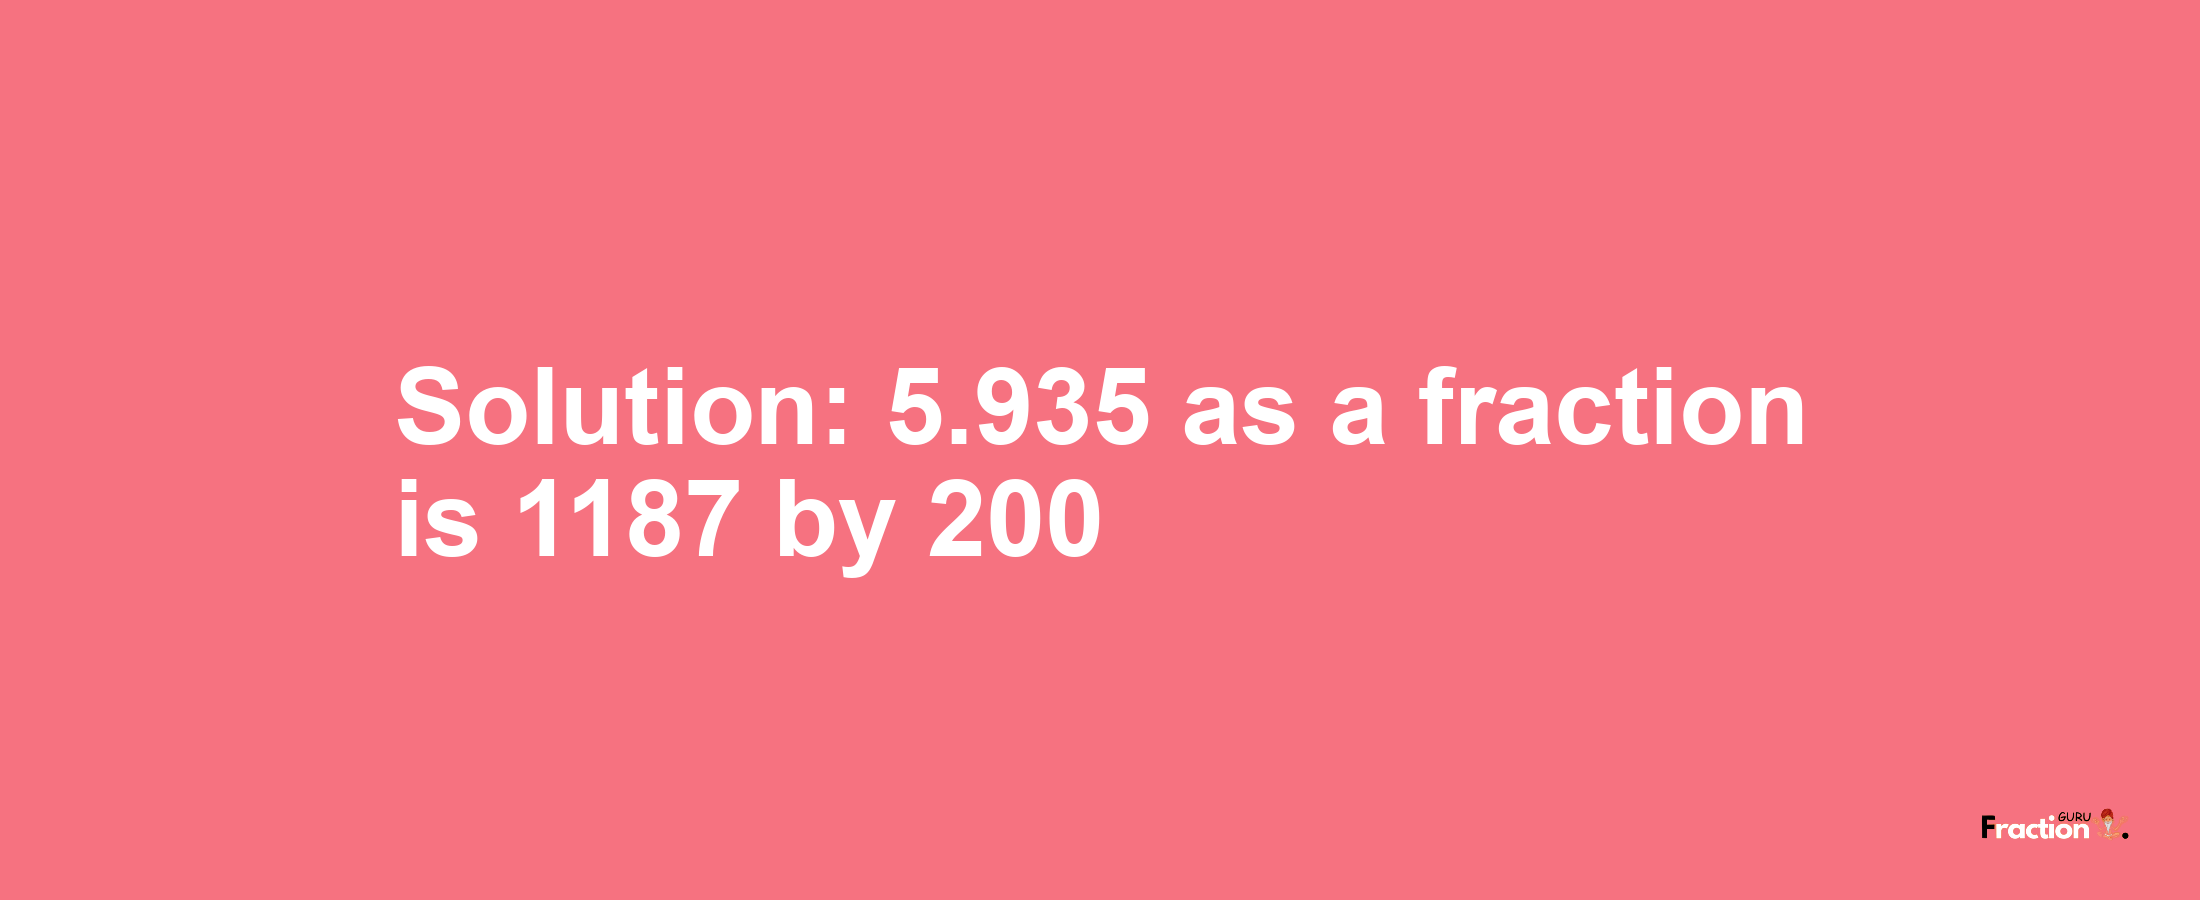 Solution:5.935 as a fraction is 1187/200